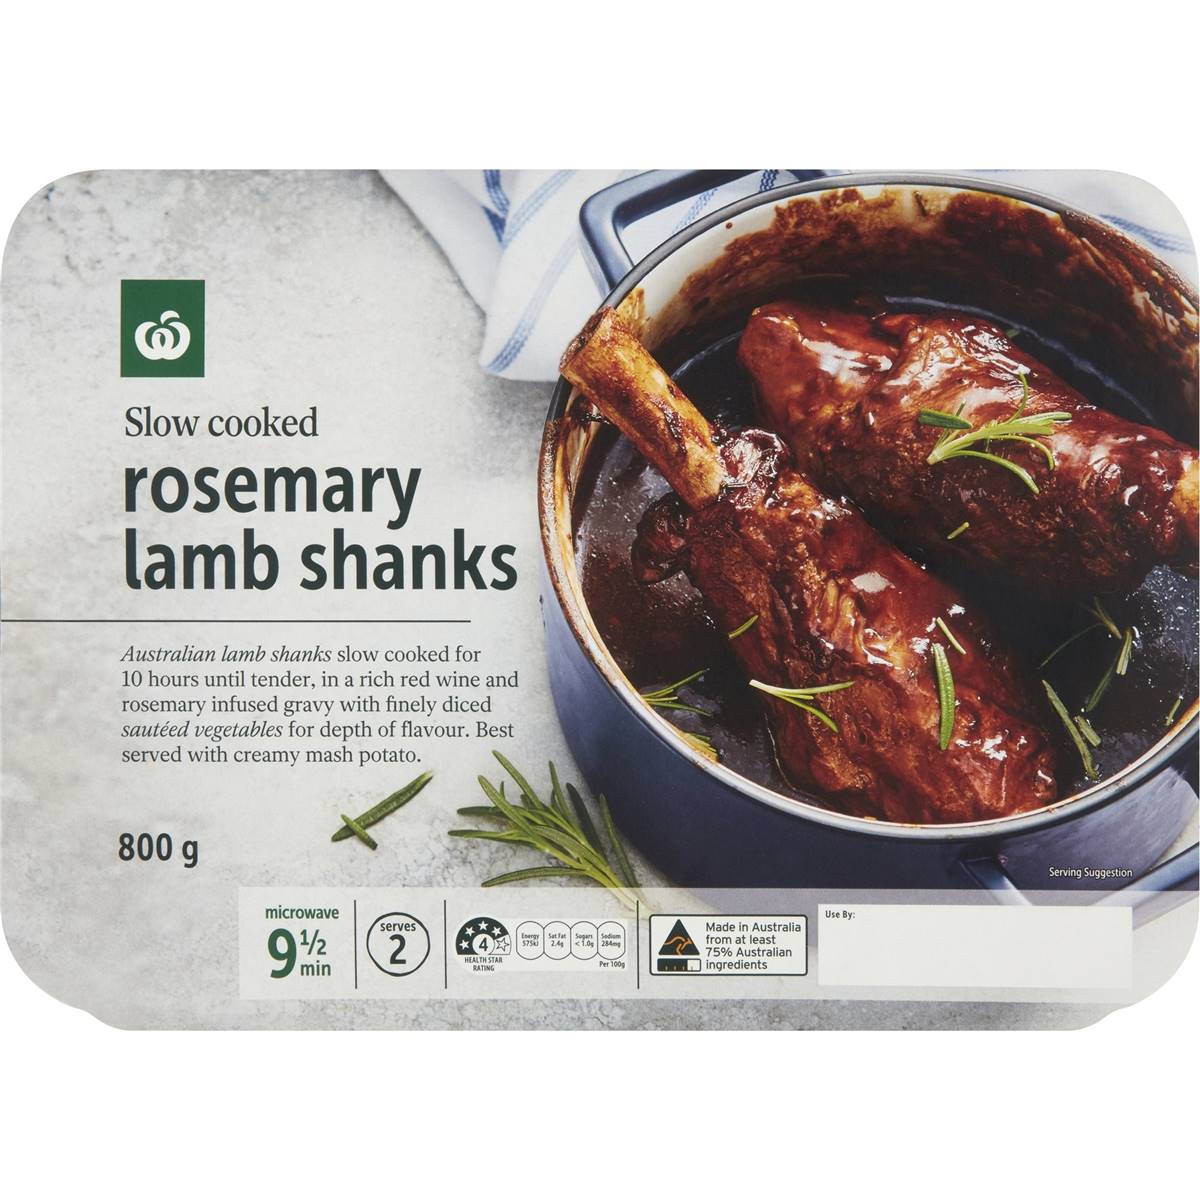 Calories in Woolworths Rosemary Lamb Shanks